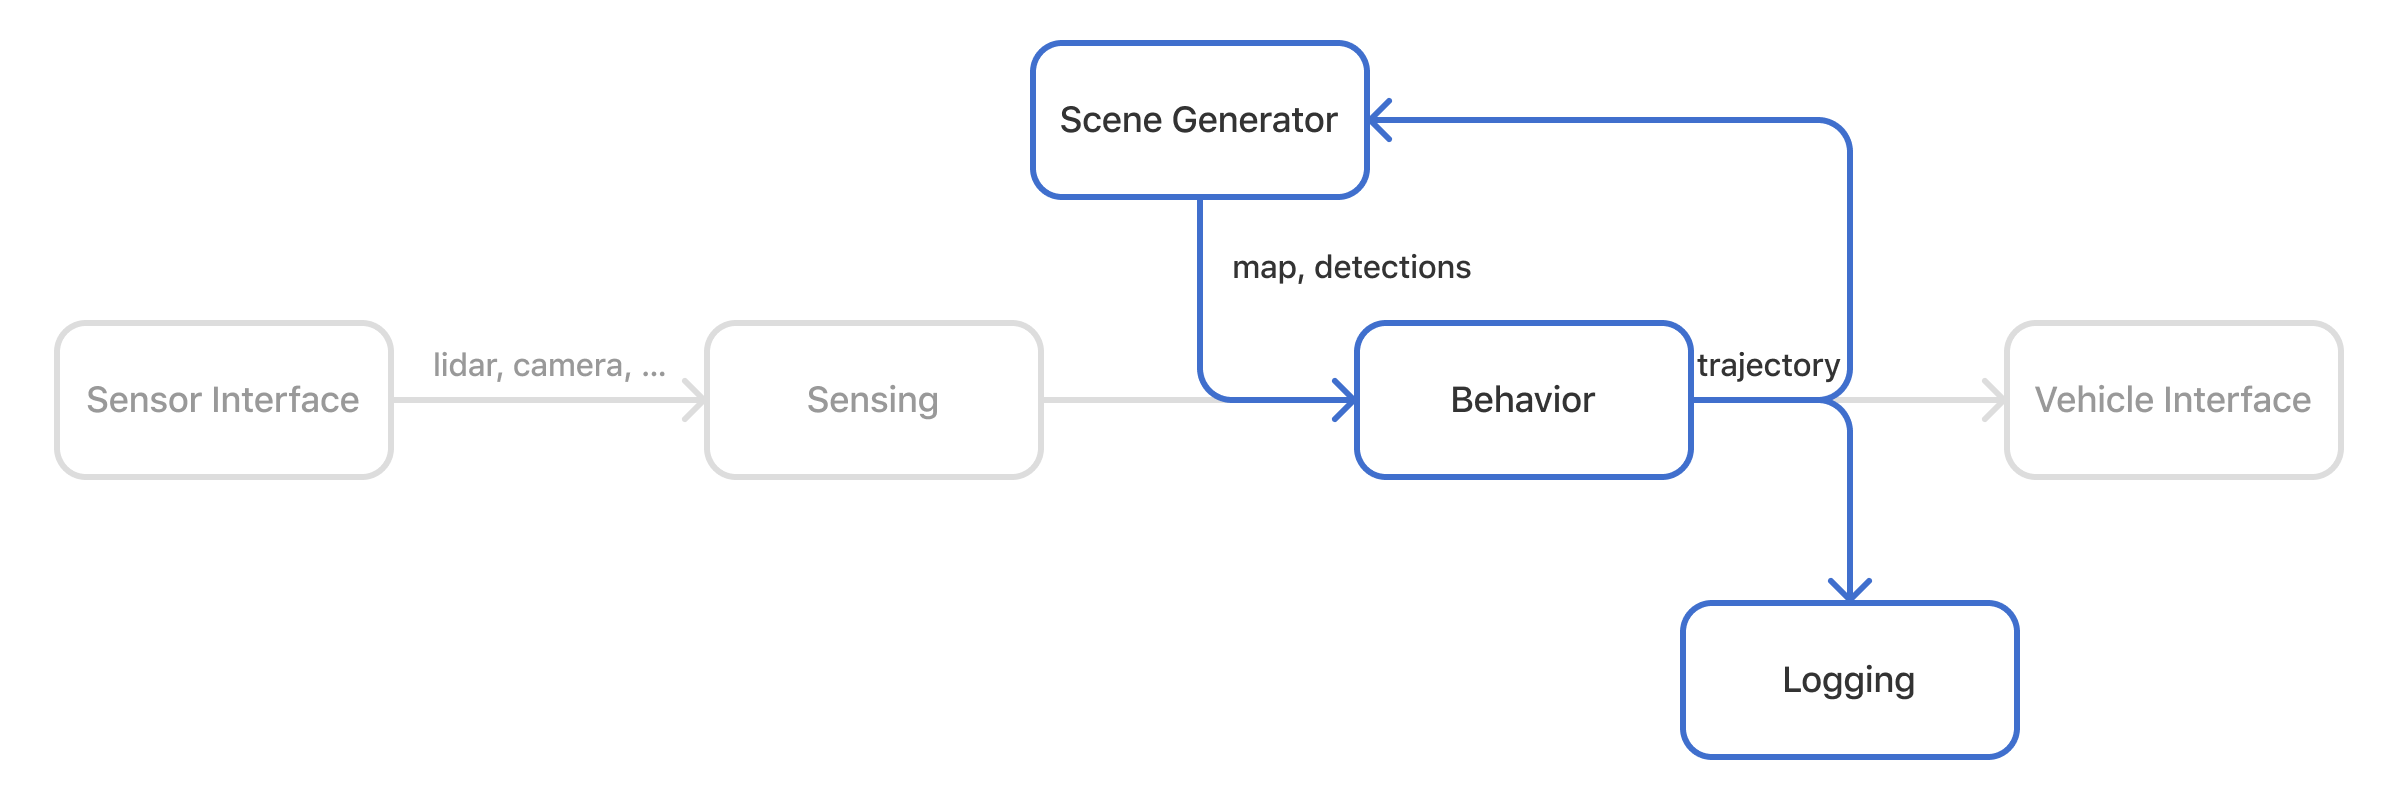 A modified block diagram with an arrow labeled map and detections pointing from Scene Generator to Behavior. The additional components Sensor Interface, Sensing, and Vehicle Interface are drawn in gray.